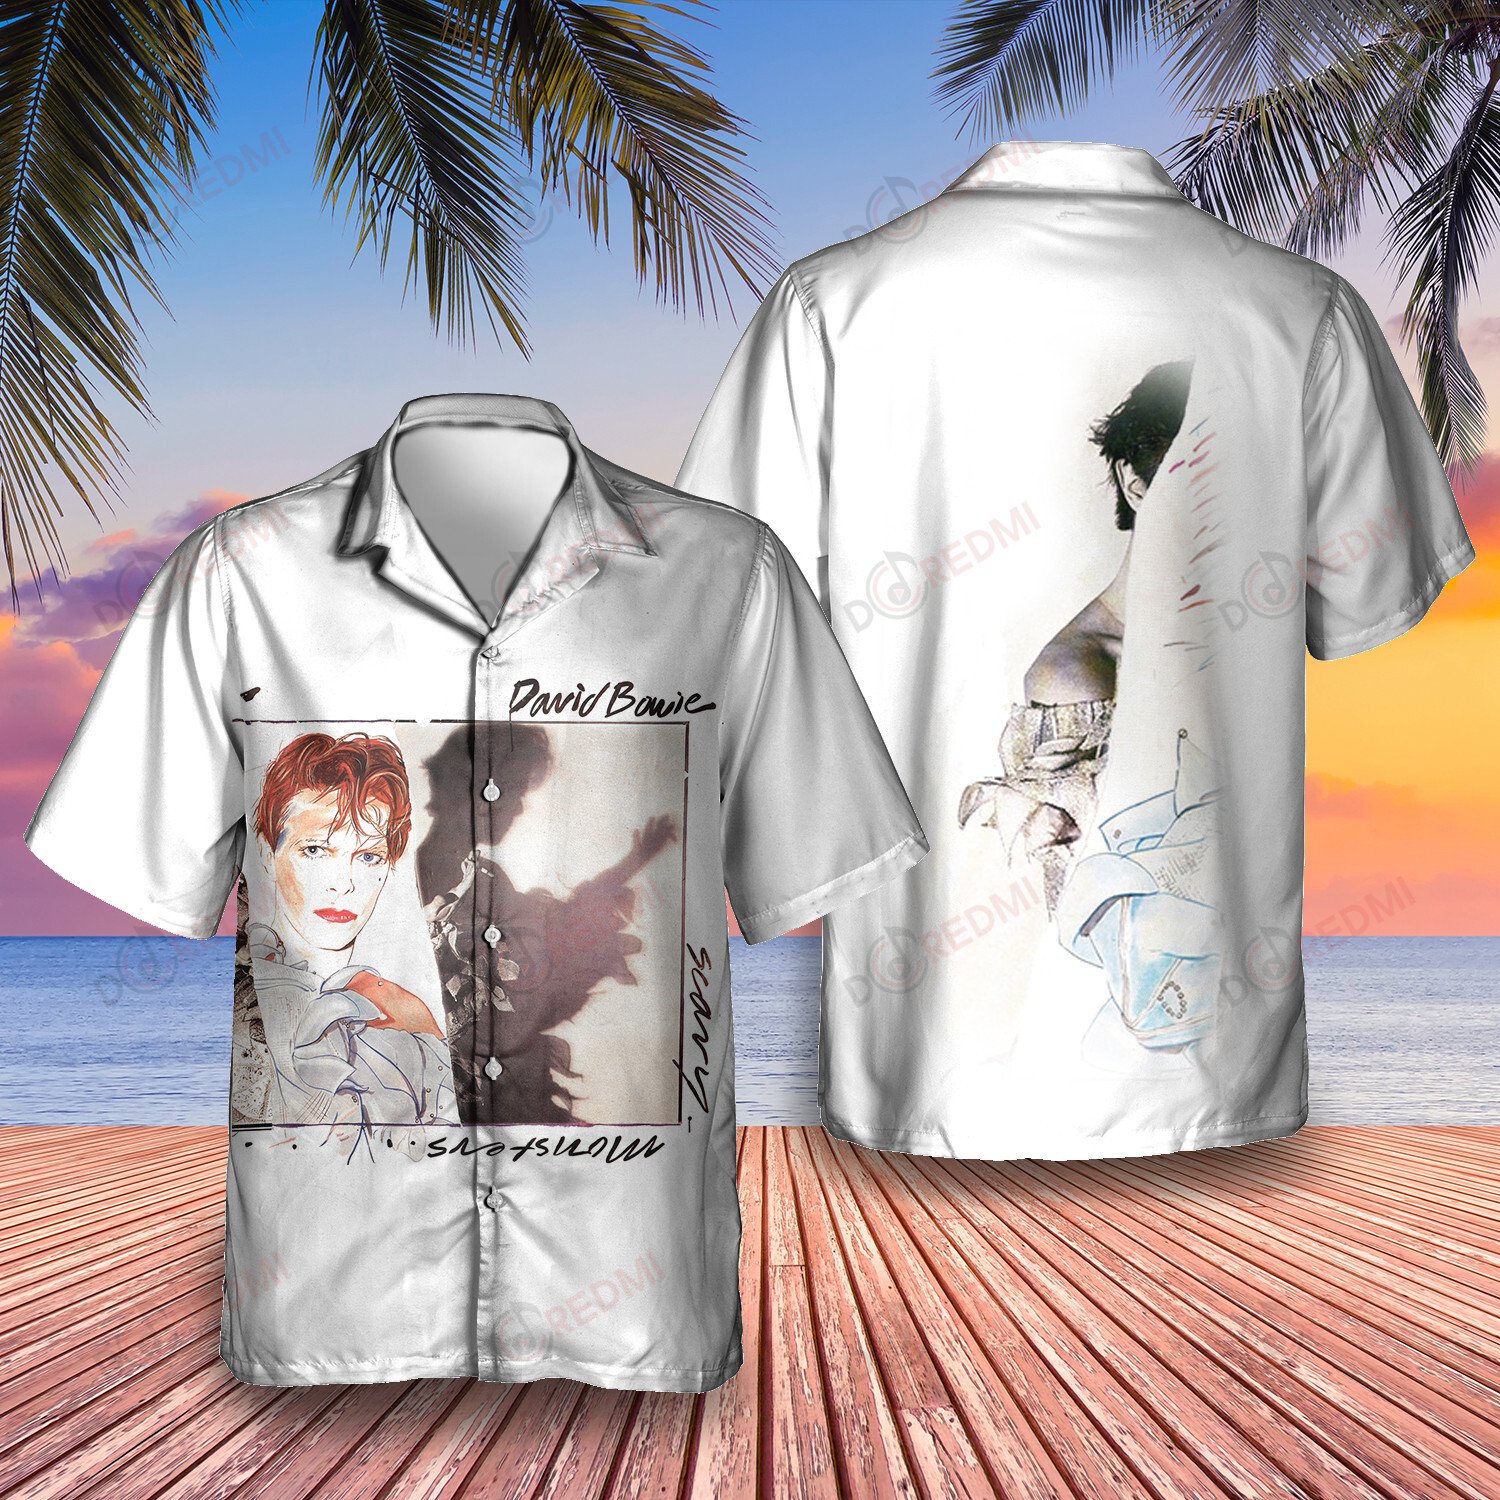 HOT David Bowie Scary Monsters Hawaii Shirt